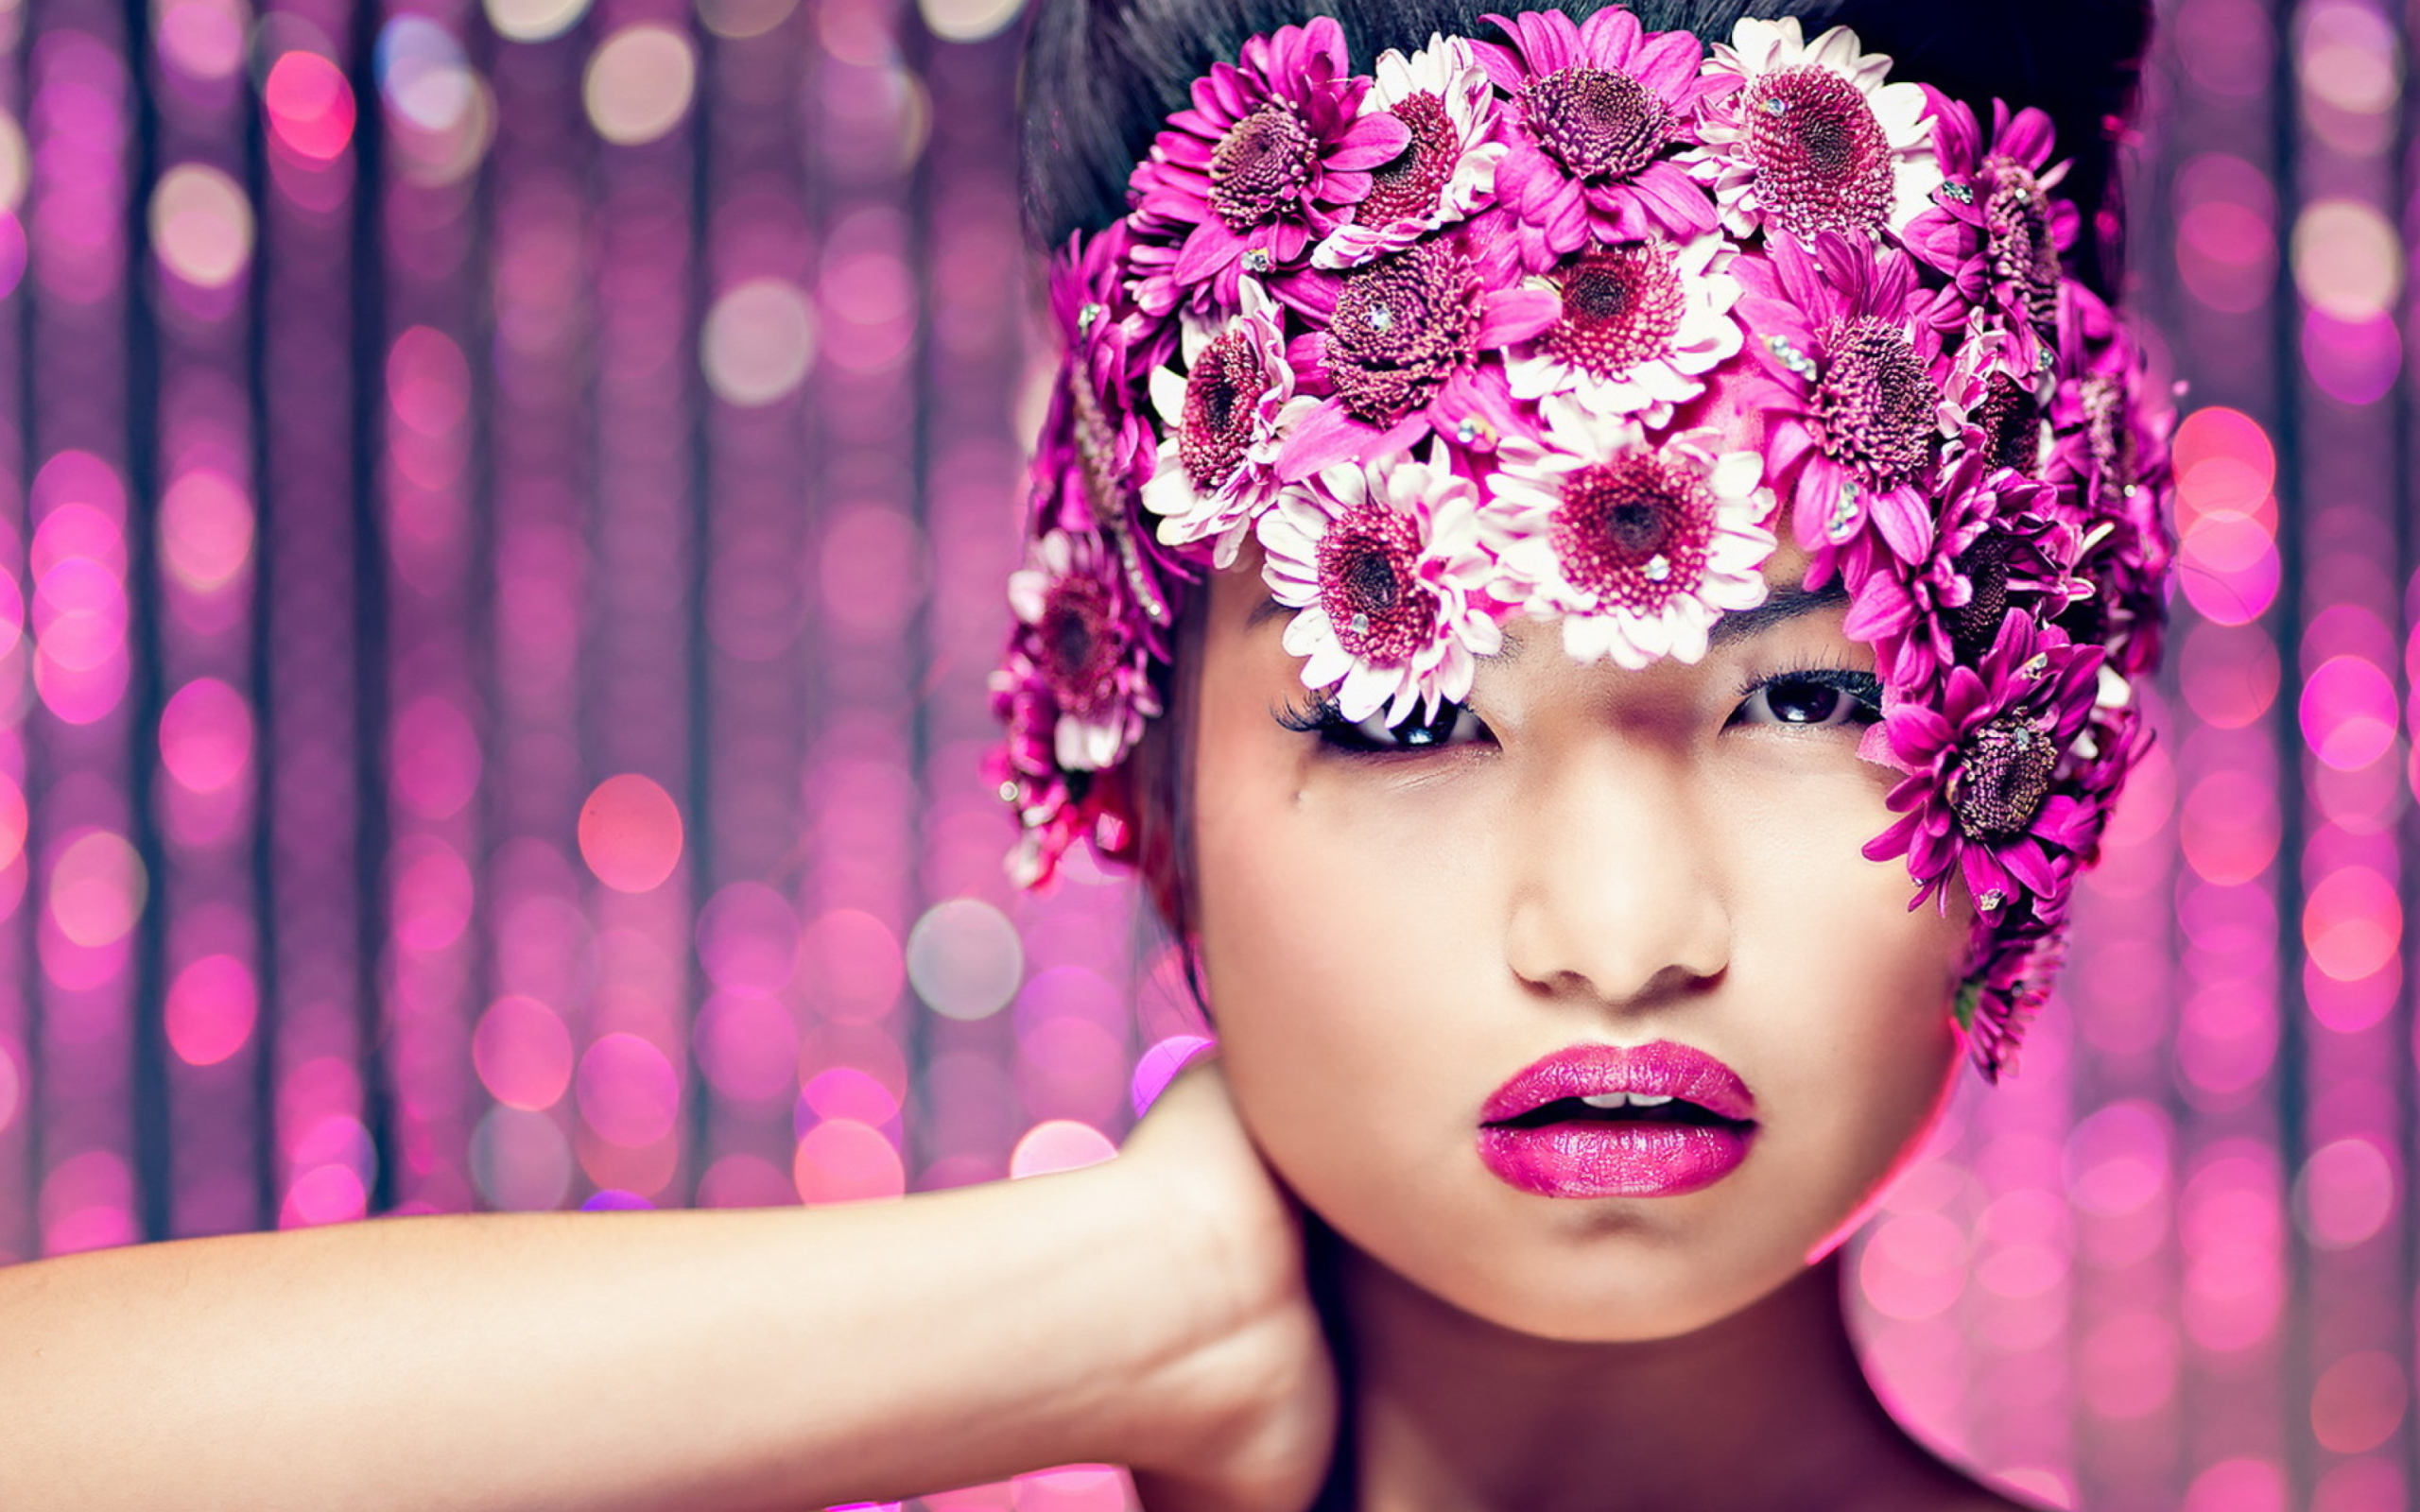 Asian Fashion Model With Pink Flower Wreath wallpaper 2560x1600